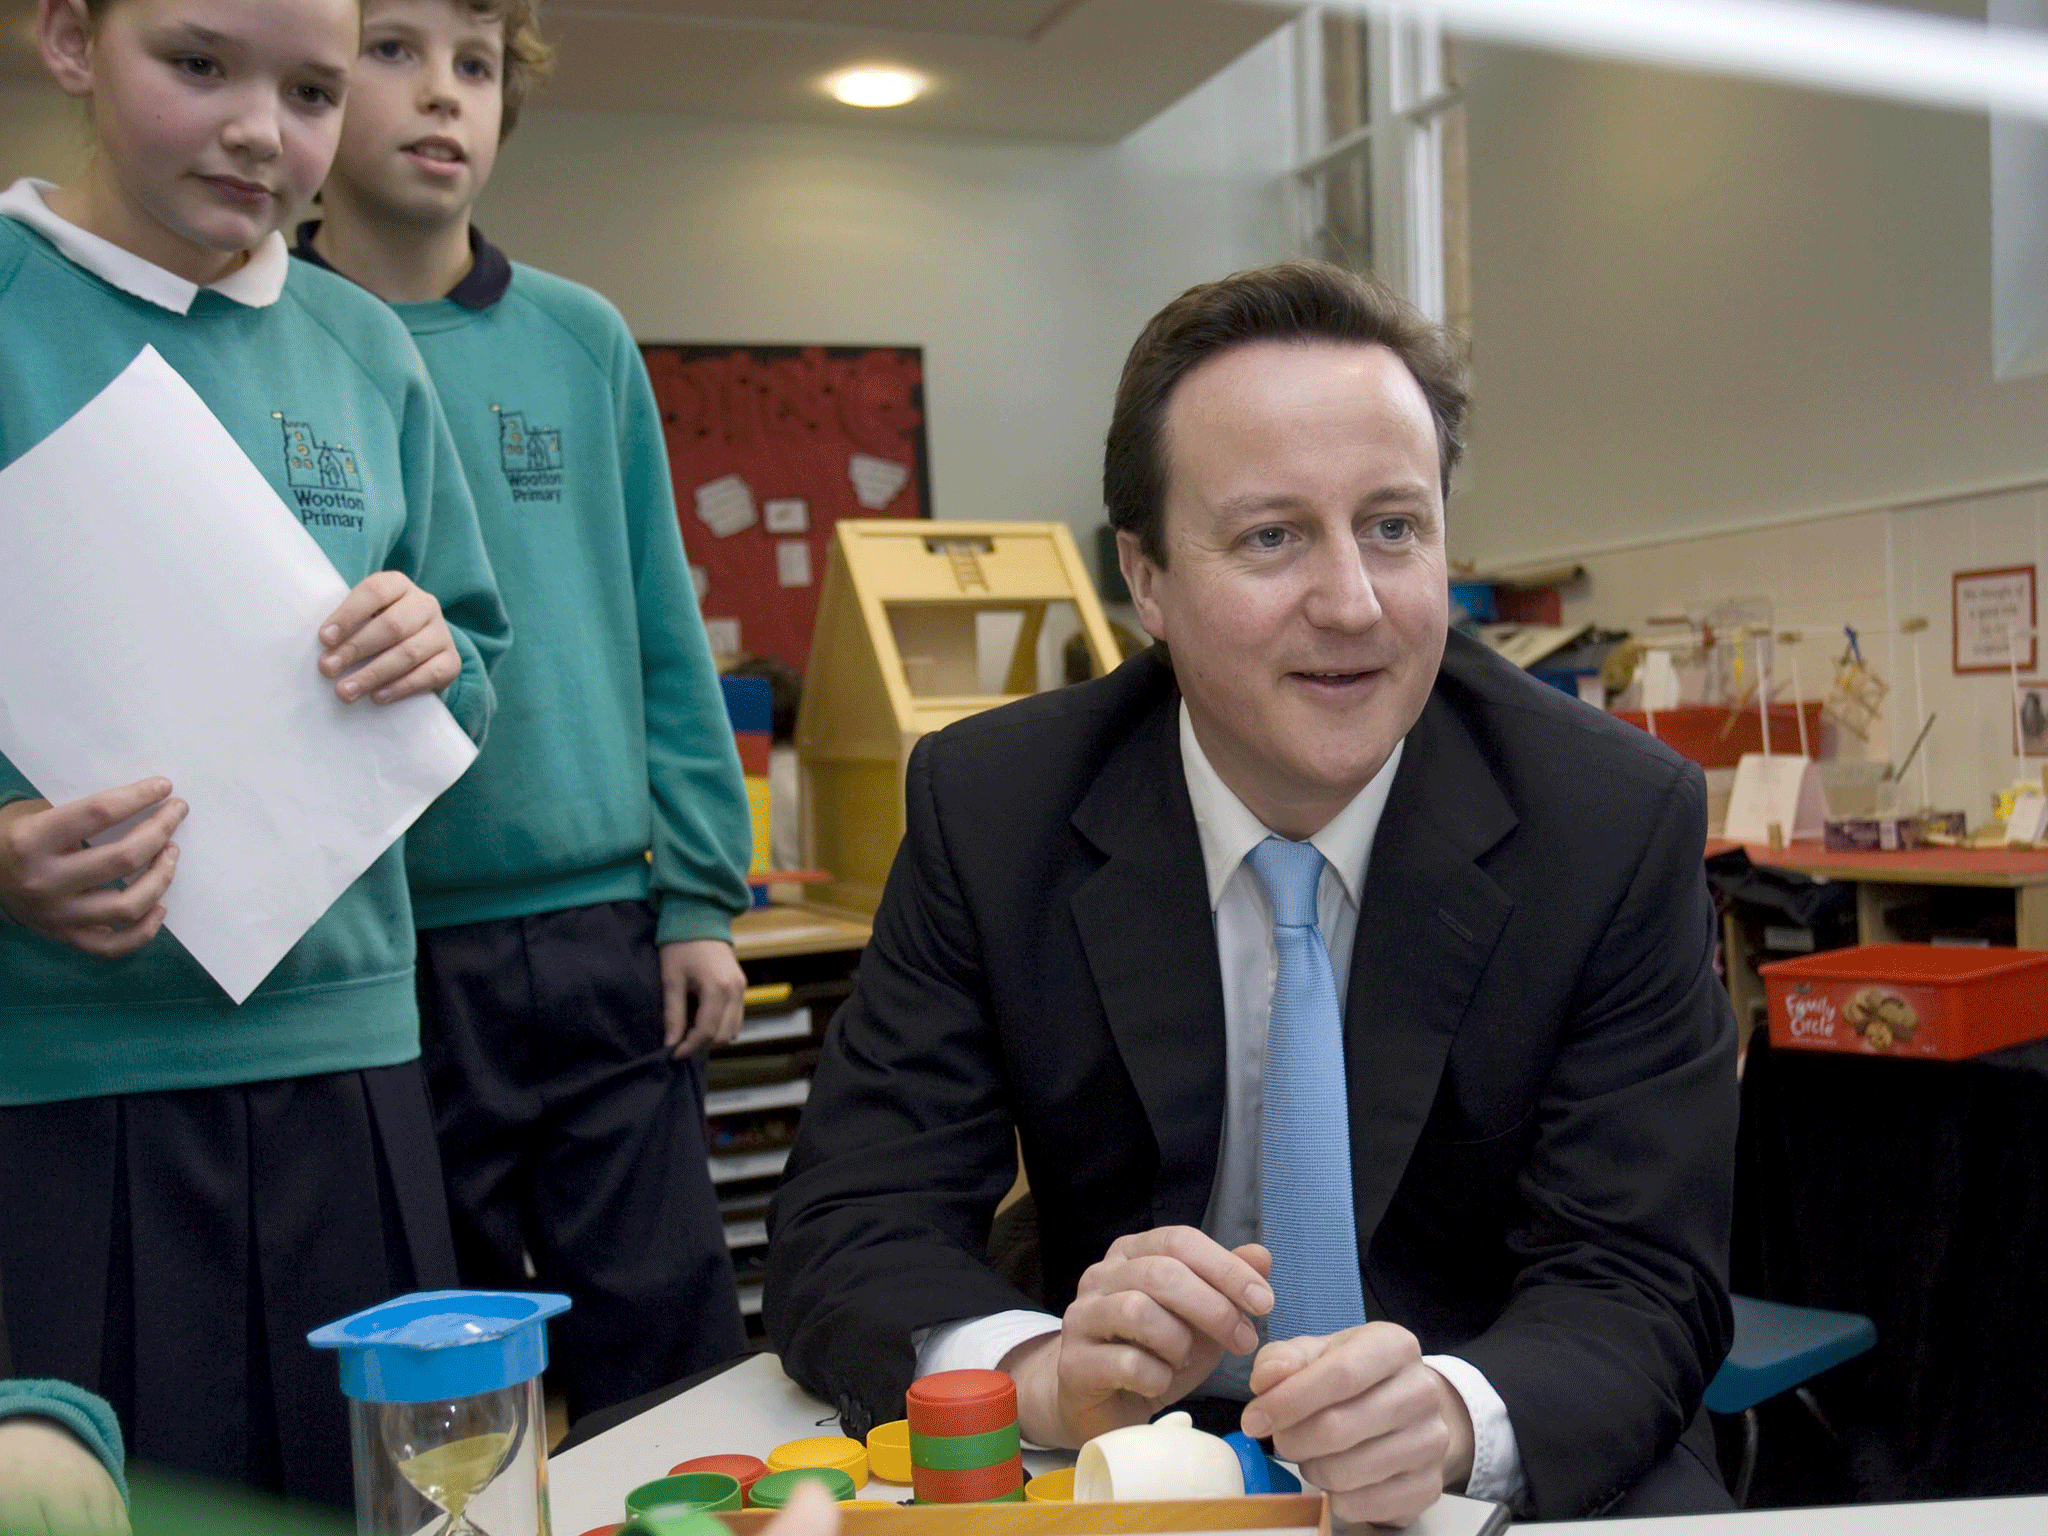 David Cameron has said he is "proud" of the UIFSM policy brought in by the Liberal Democrats